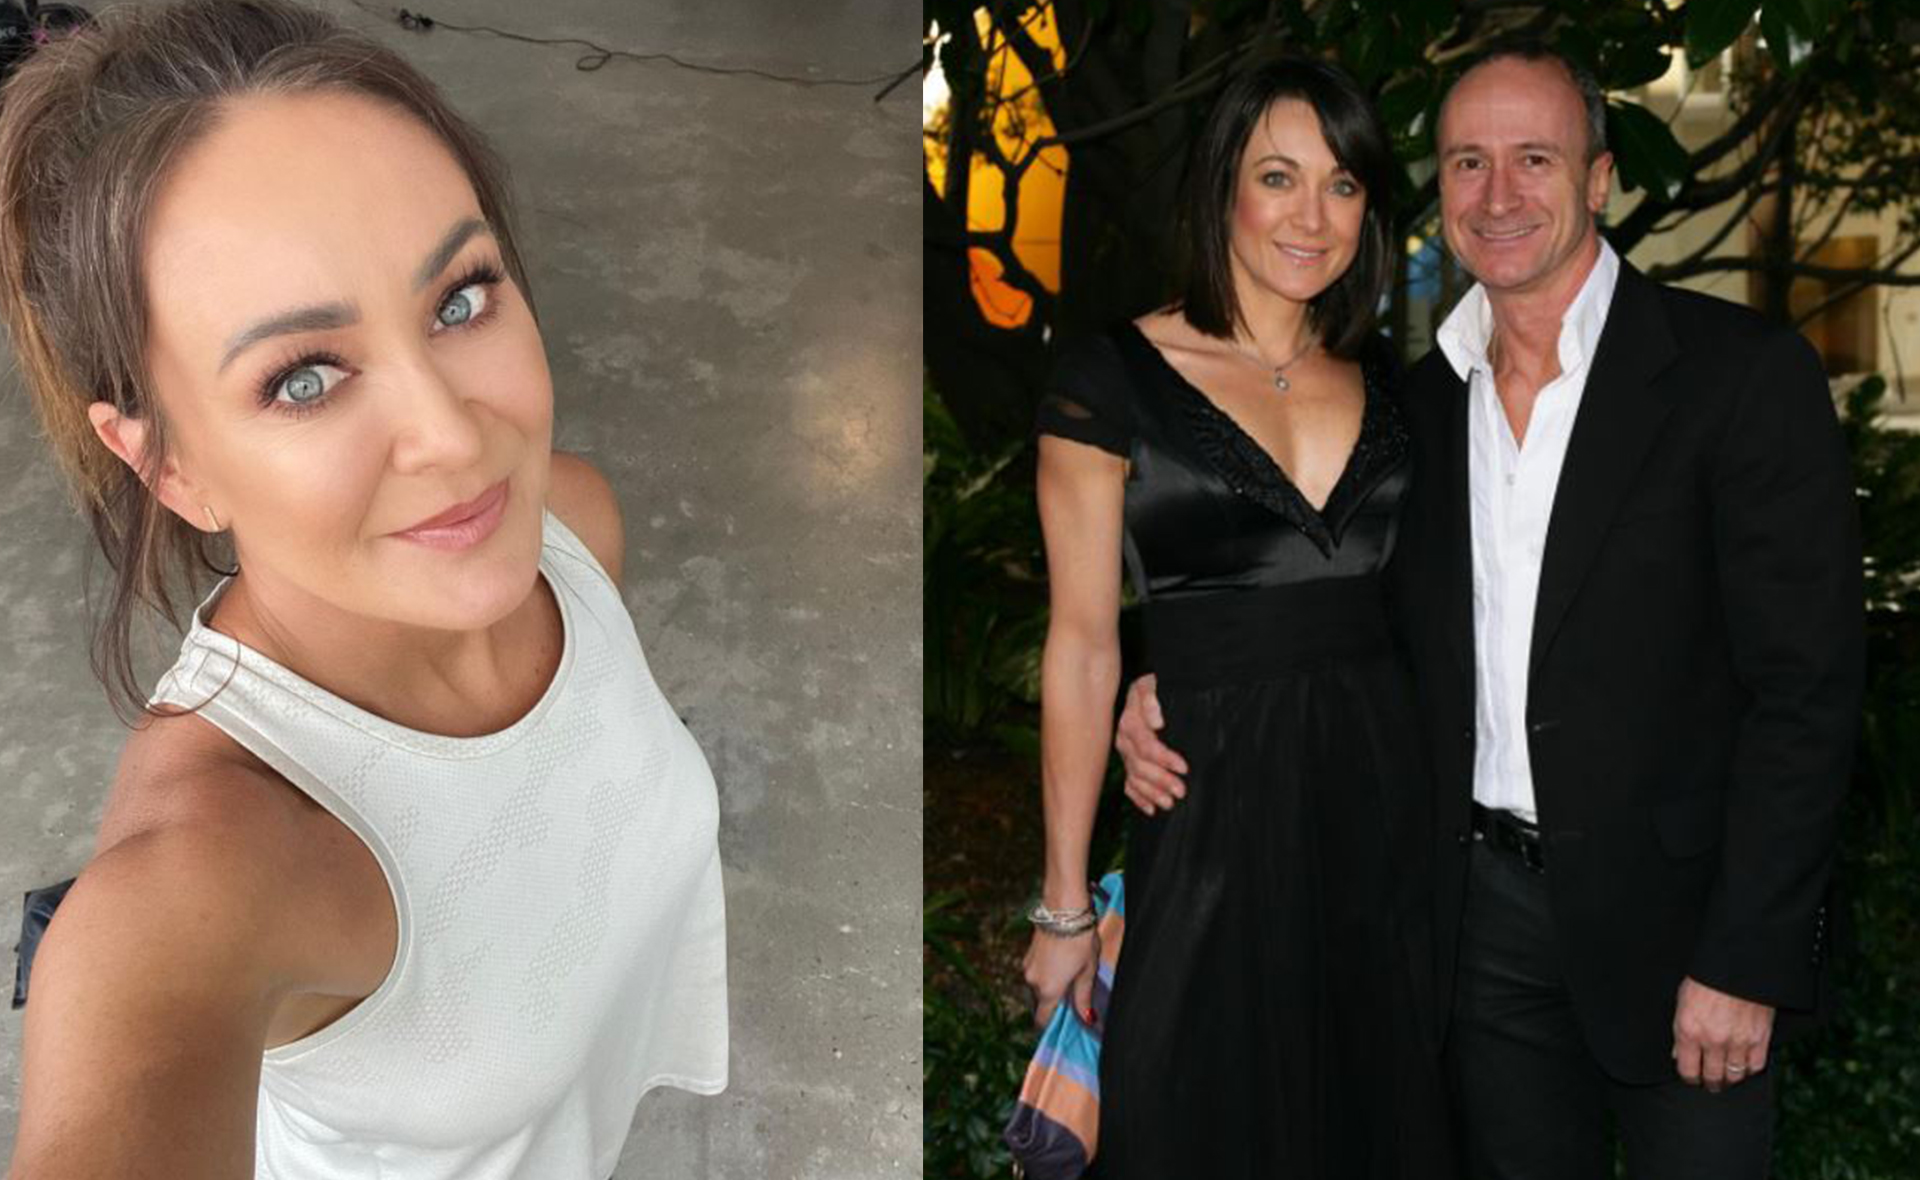 Michelle Bridges has had a turbelent romantic past, but she’s stronger than ever